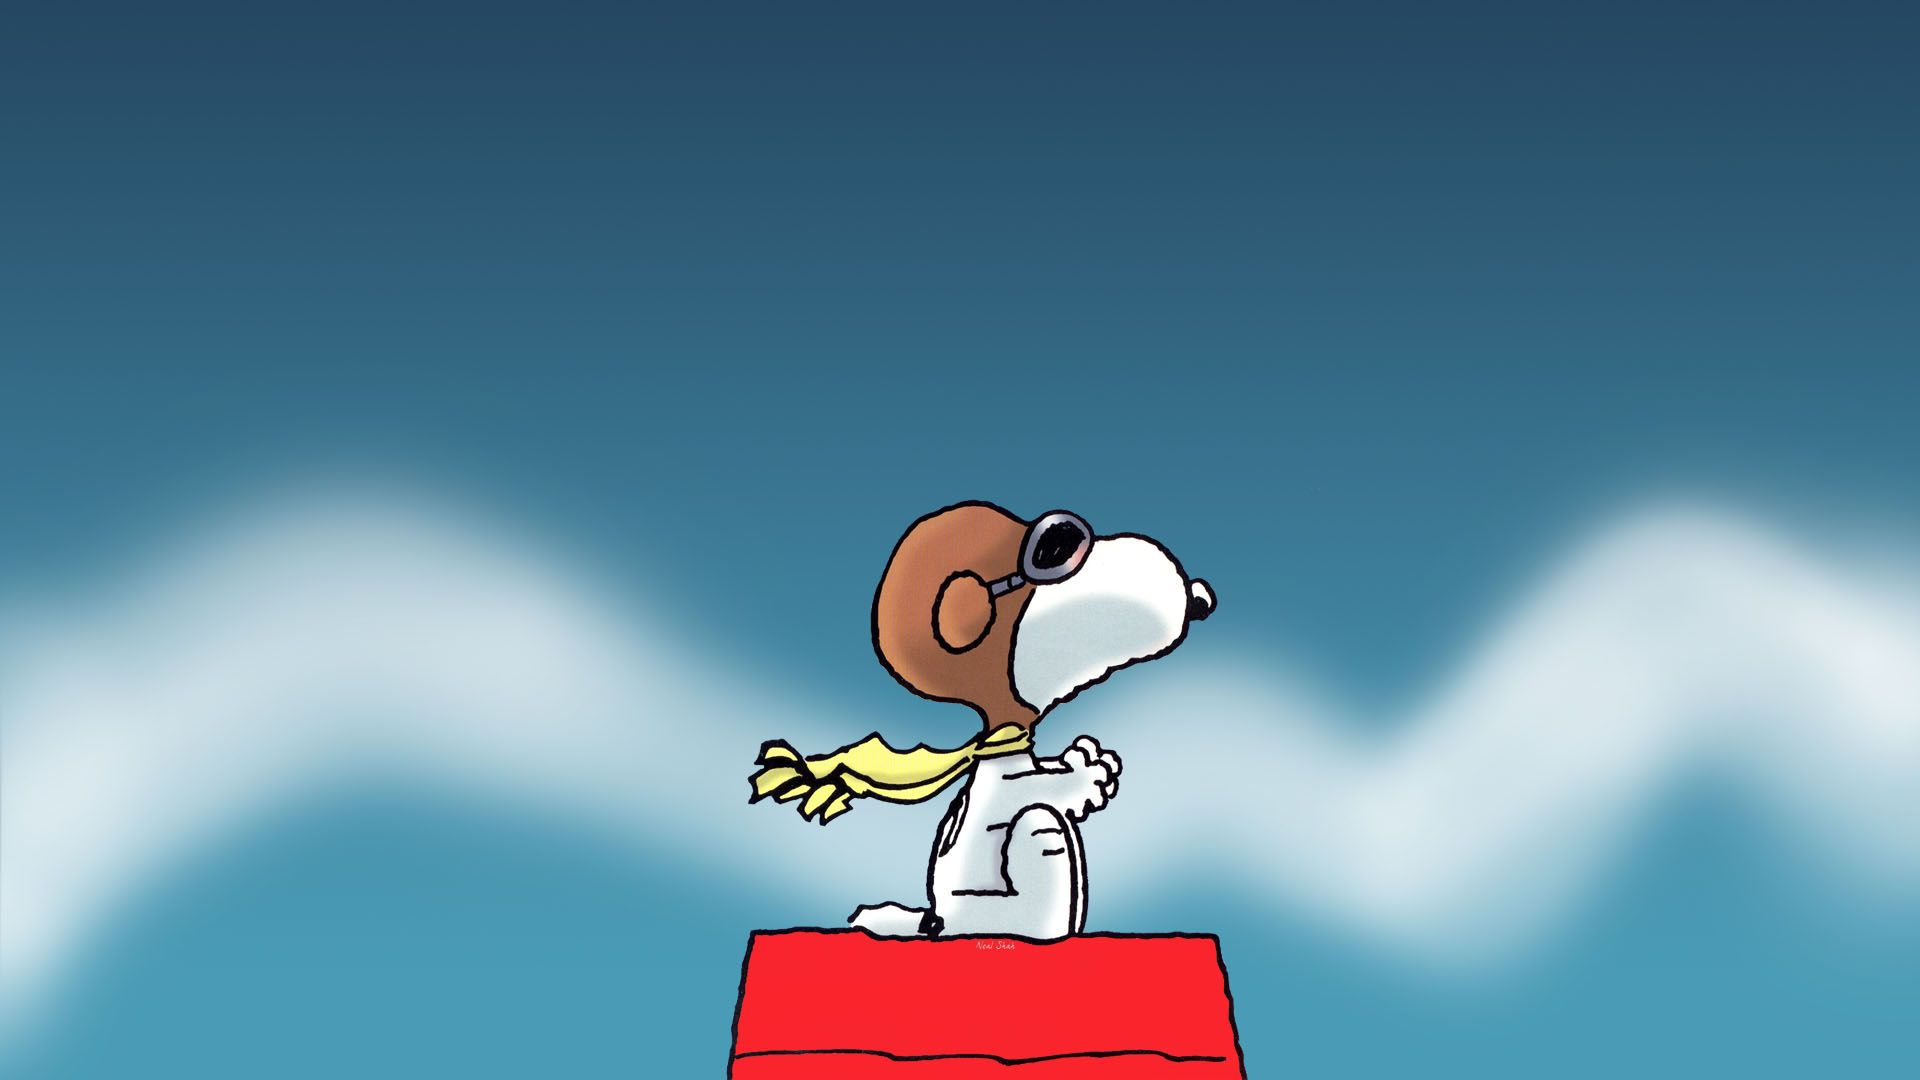 Top 15 Cute Snoopy Wallpaper And Theme For Windows 8 All For